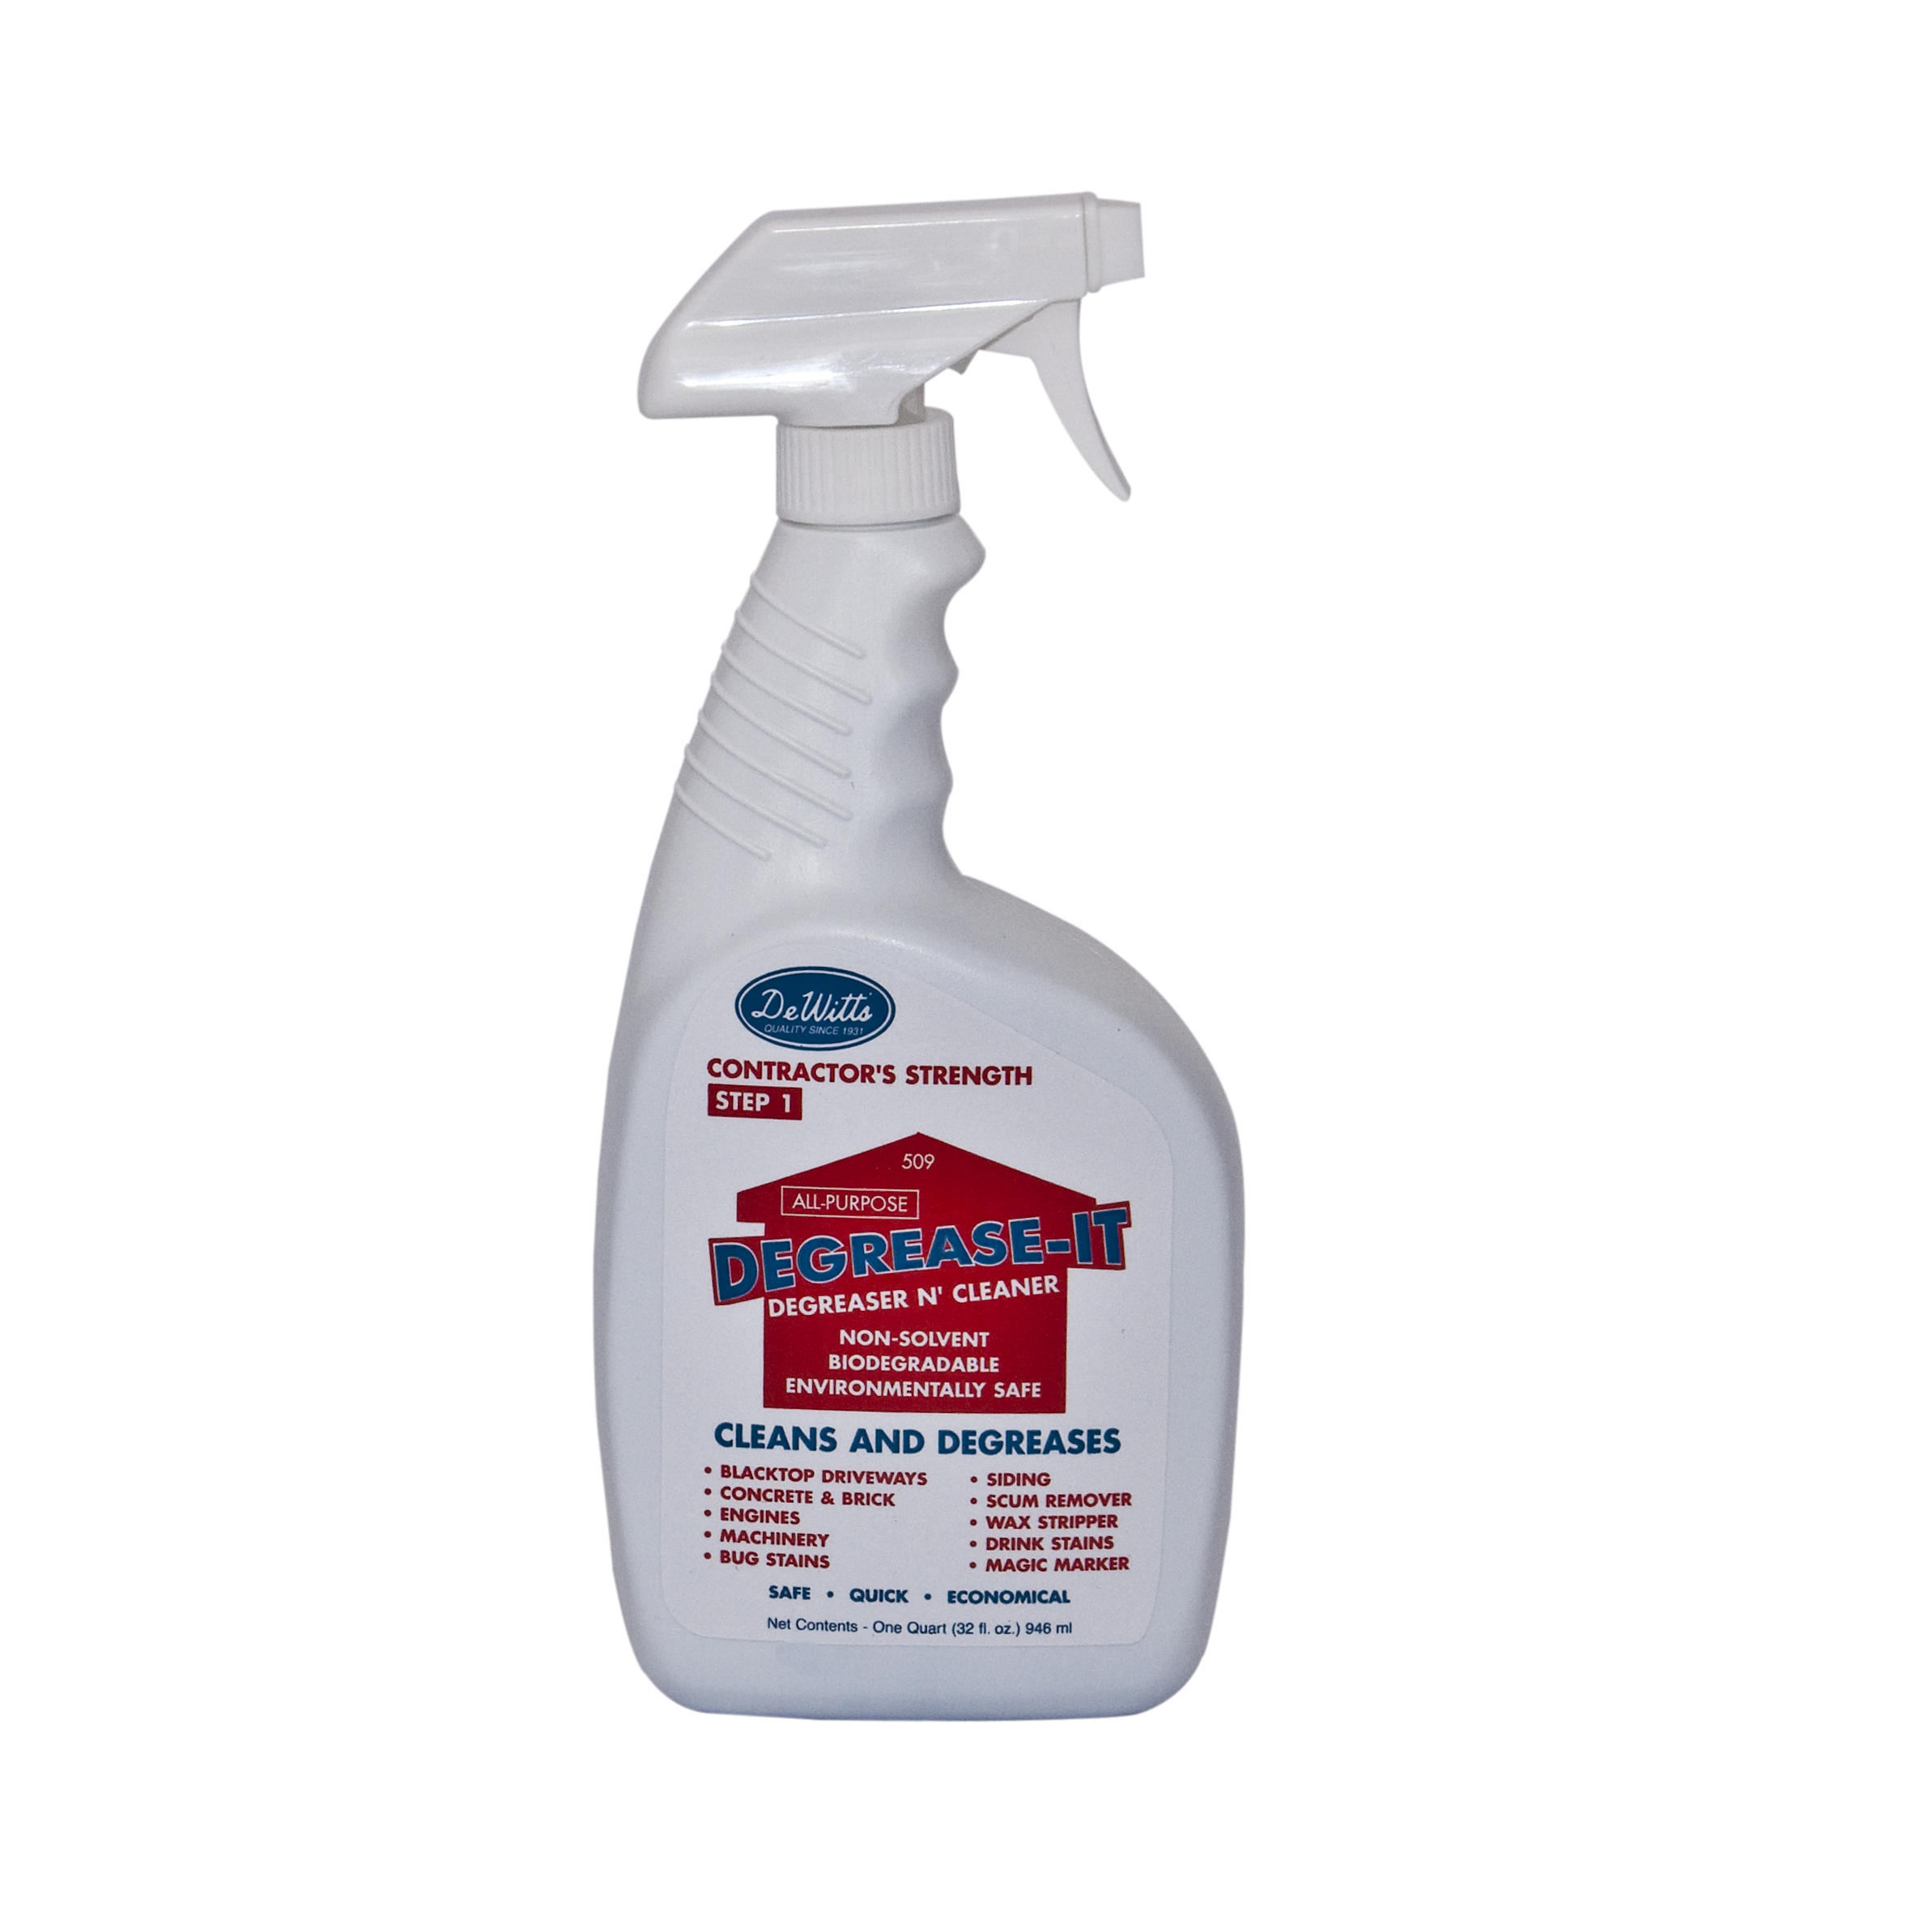 hdcleaner review